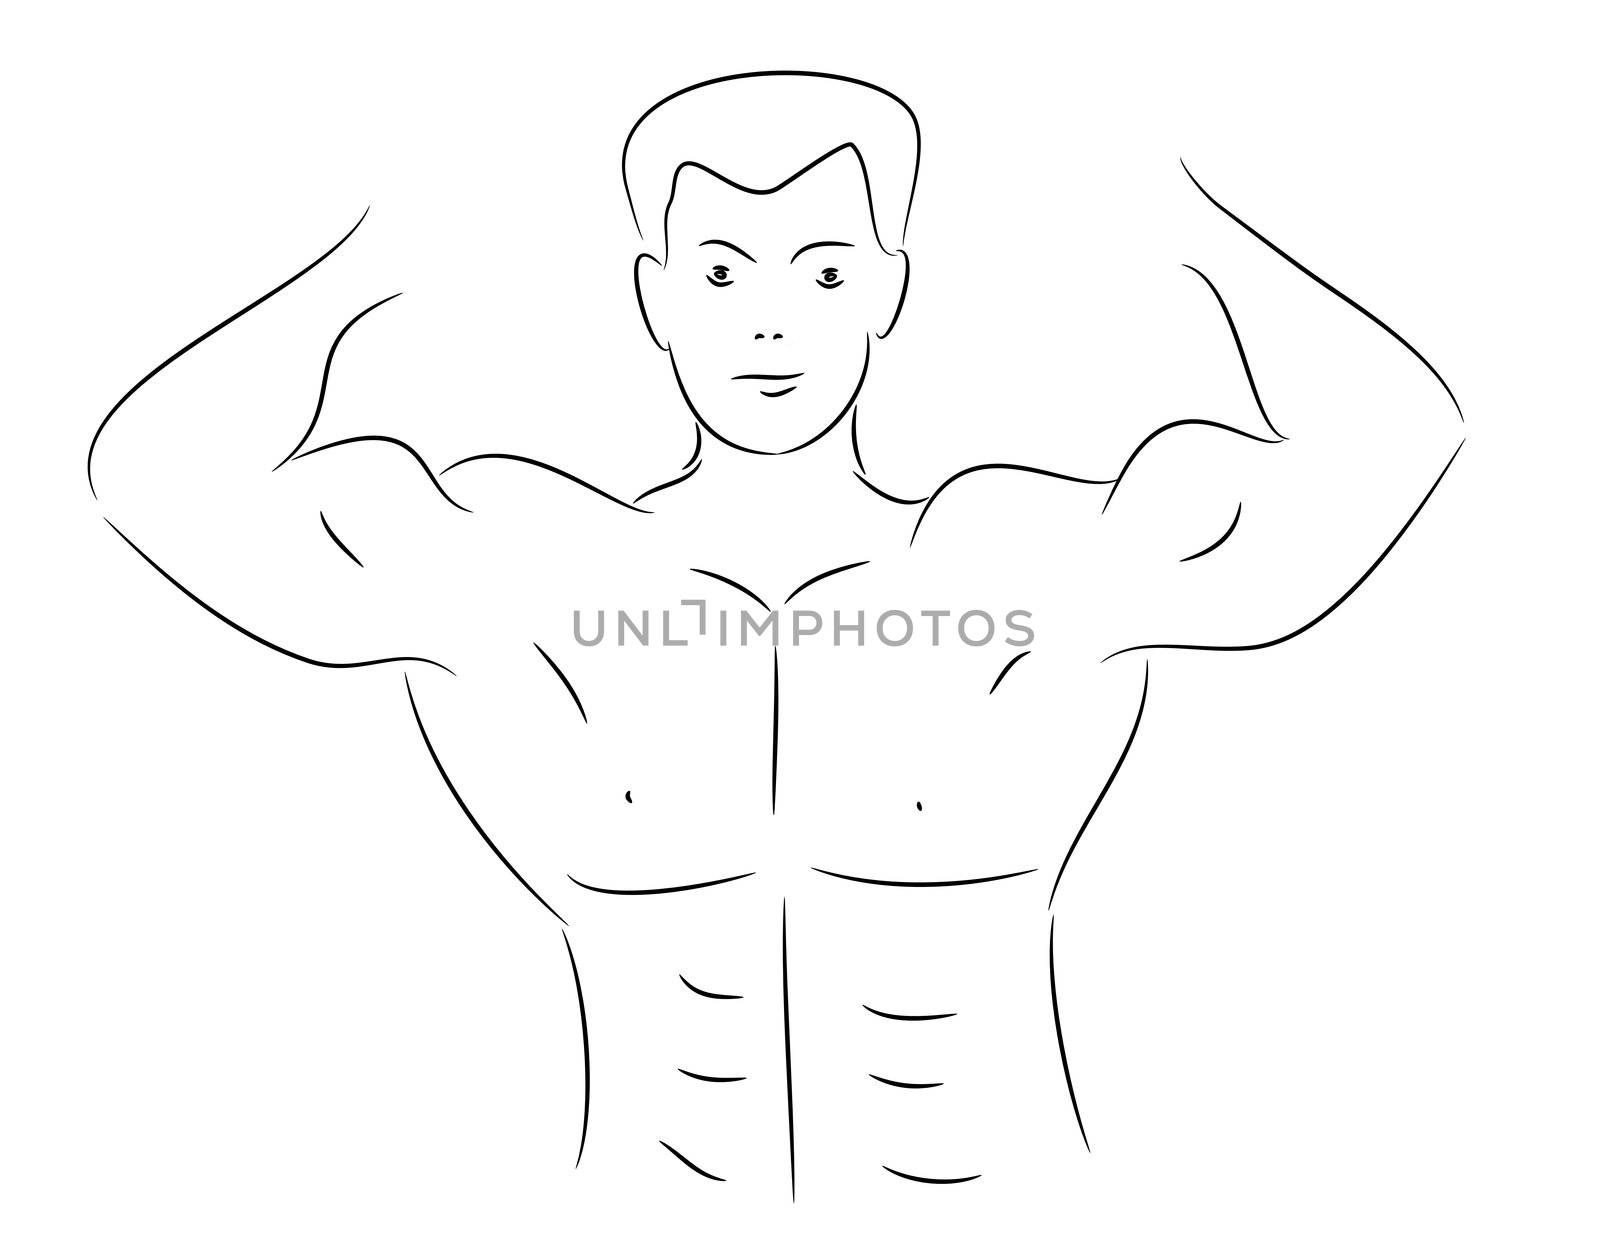 Lineart sketch of a muscular bodybuilder showing his flexed upper body and torso